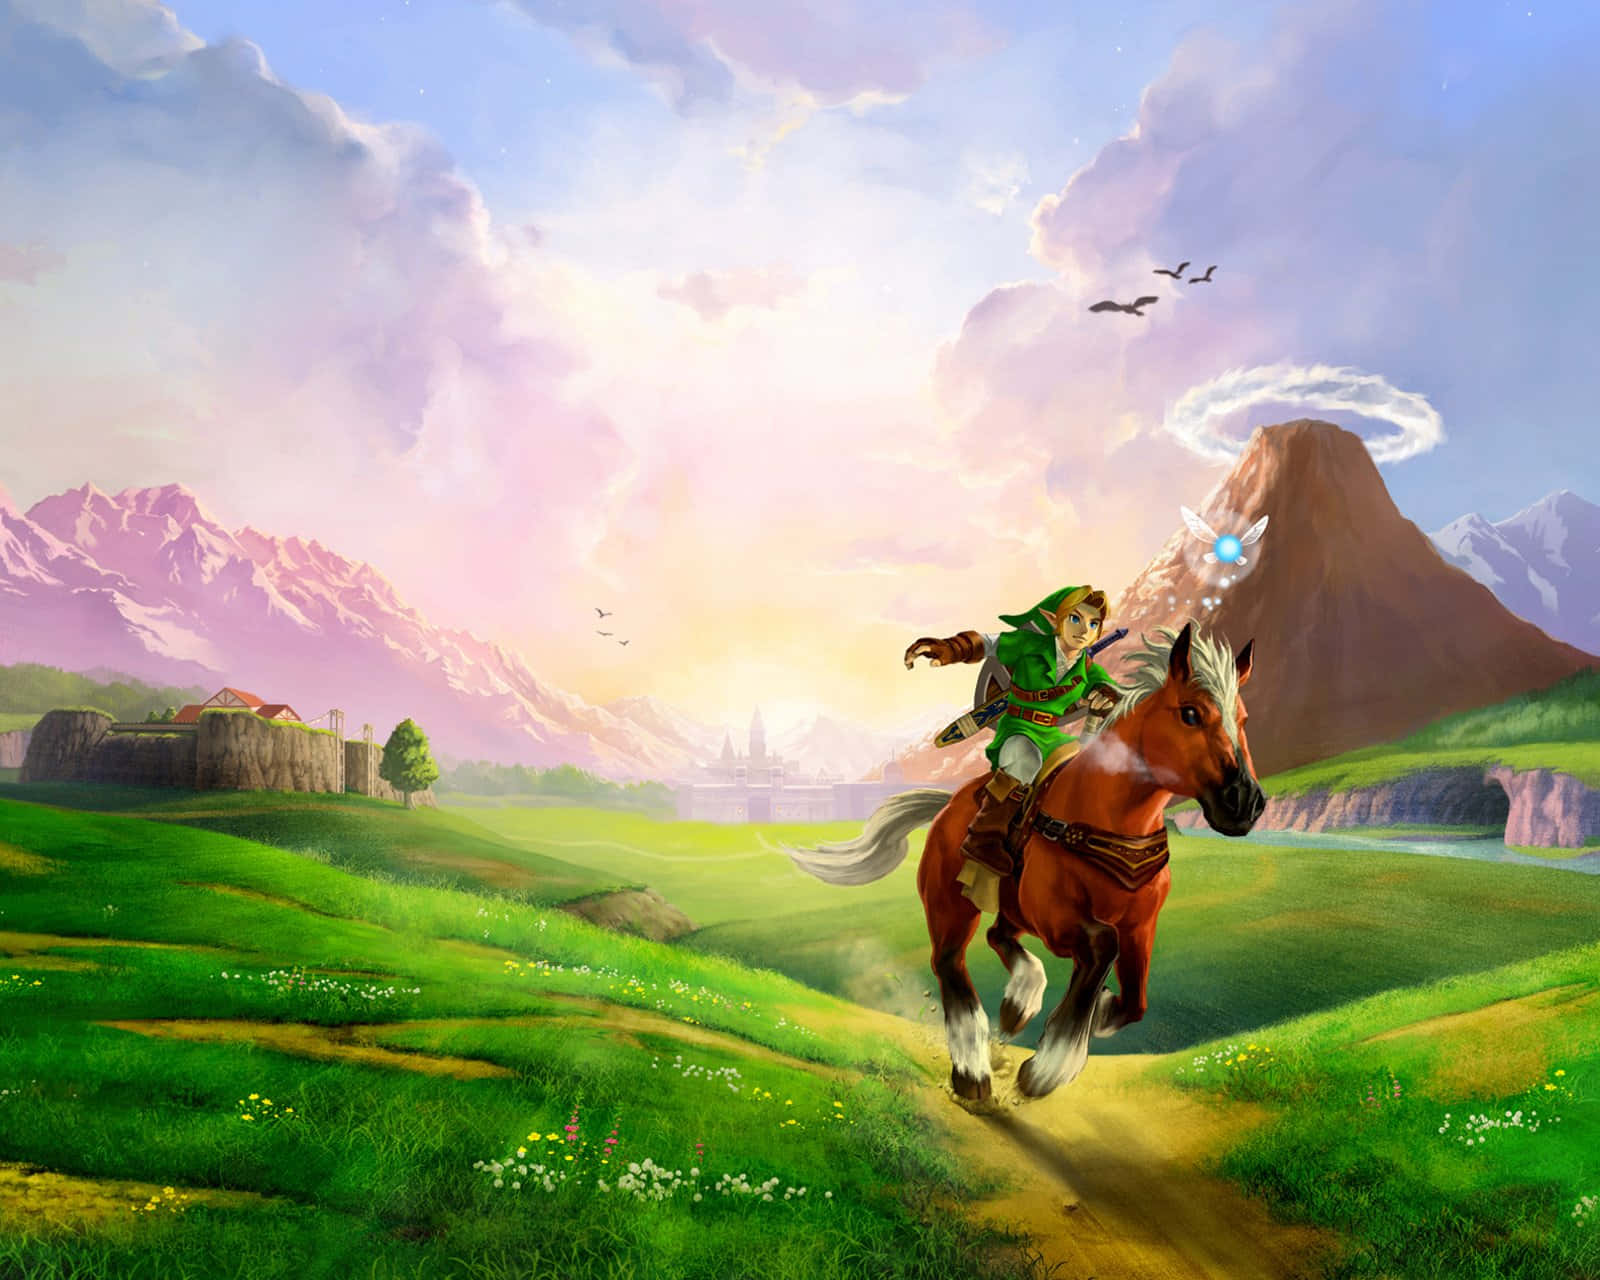 Link riding Epona through a magical forest in The Legend of Zelda Wallpaper